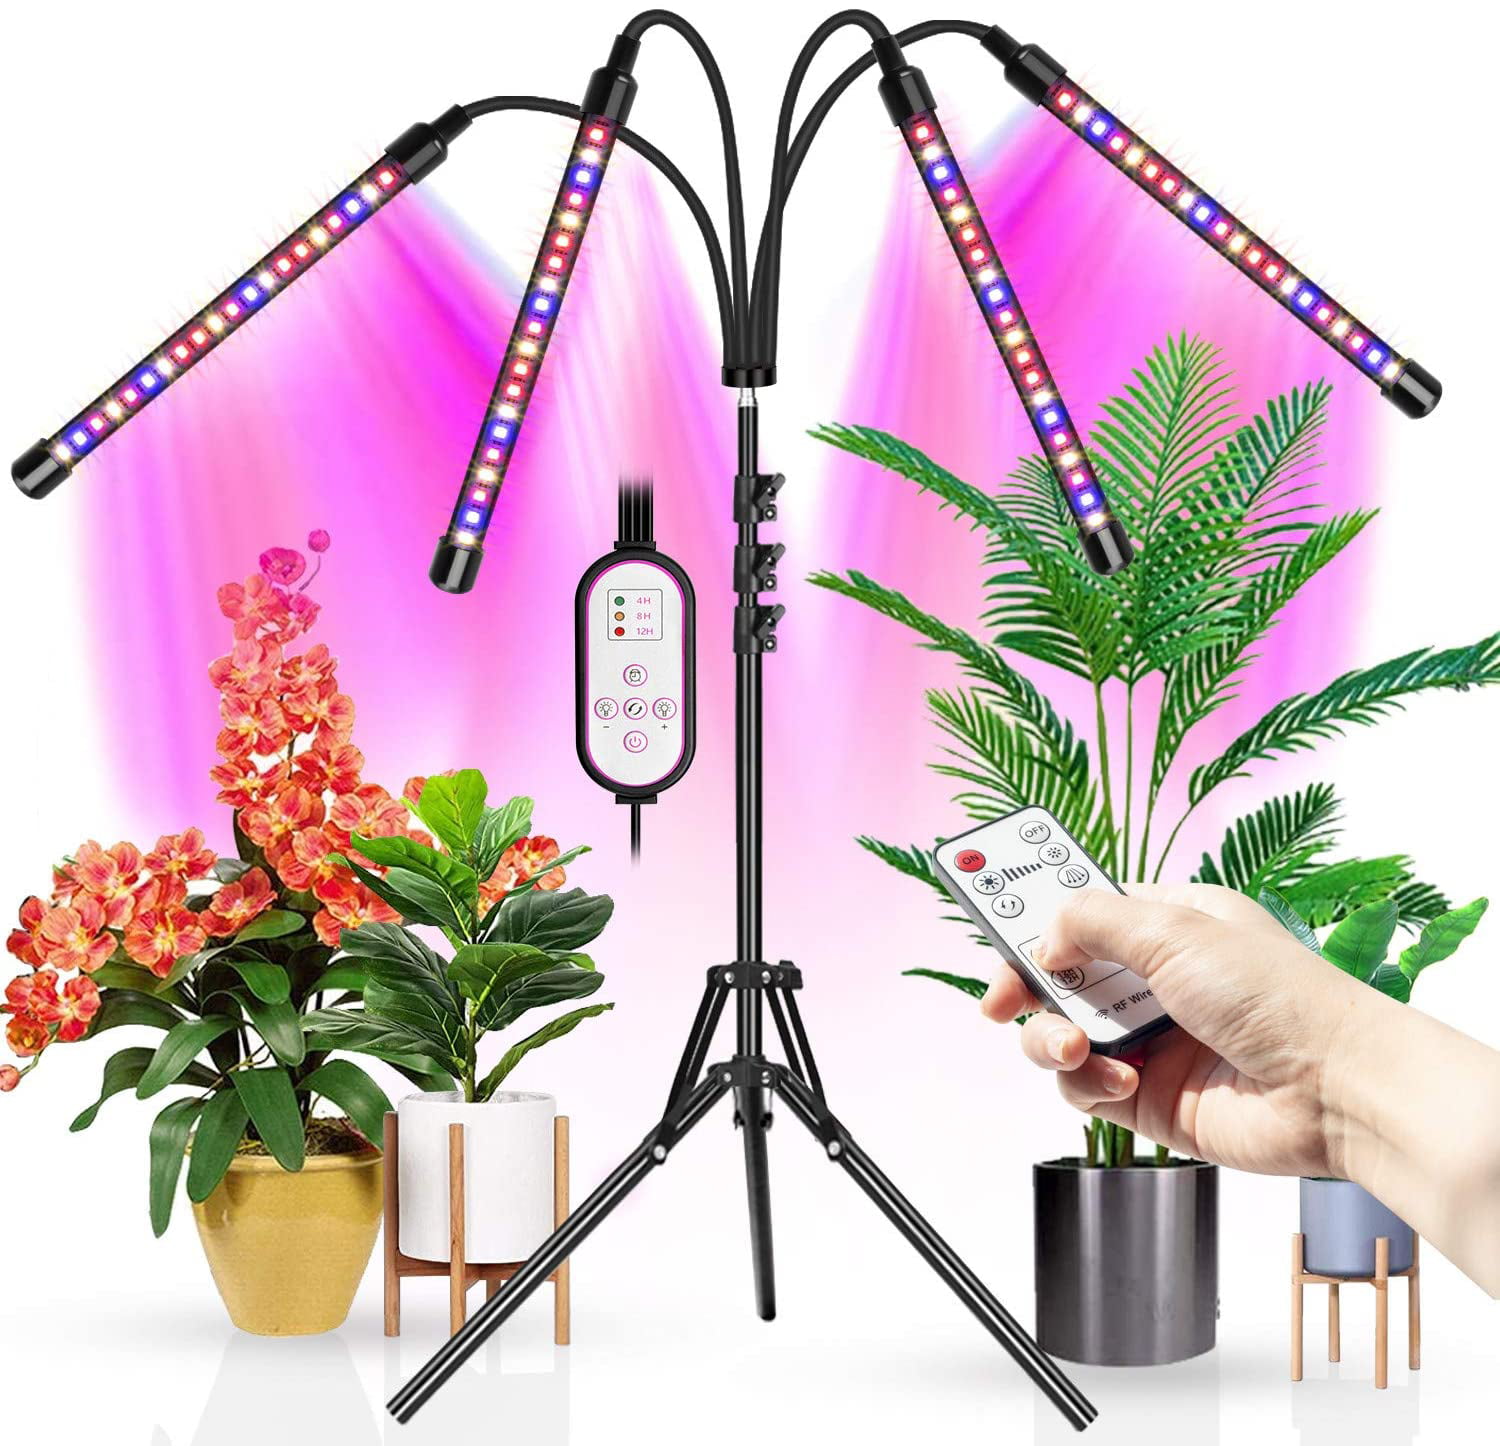 4 Head 80LED Grow Light Plant Growing Lamp Light for Indoor Plant Hydroponics 